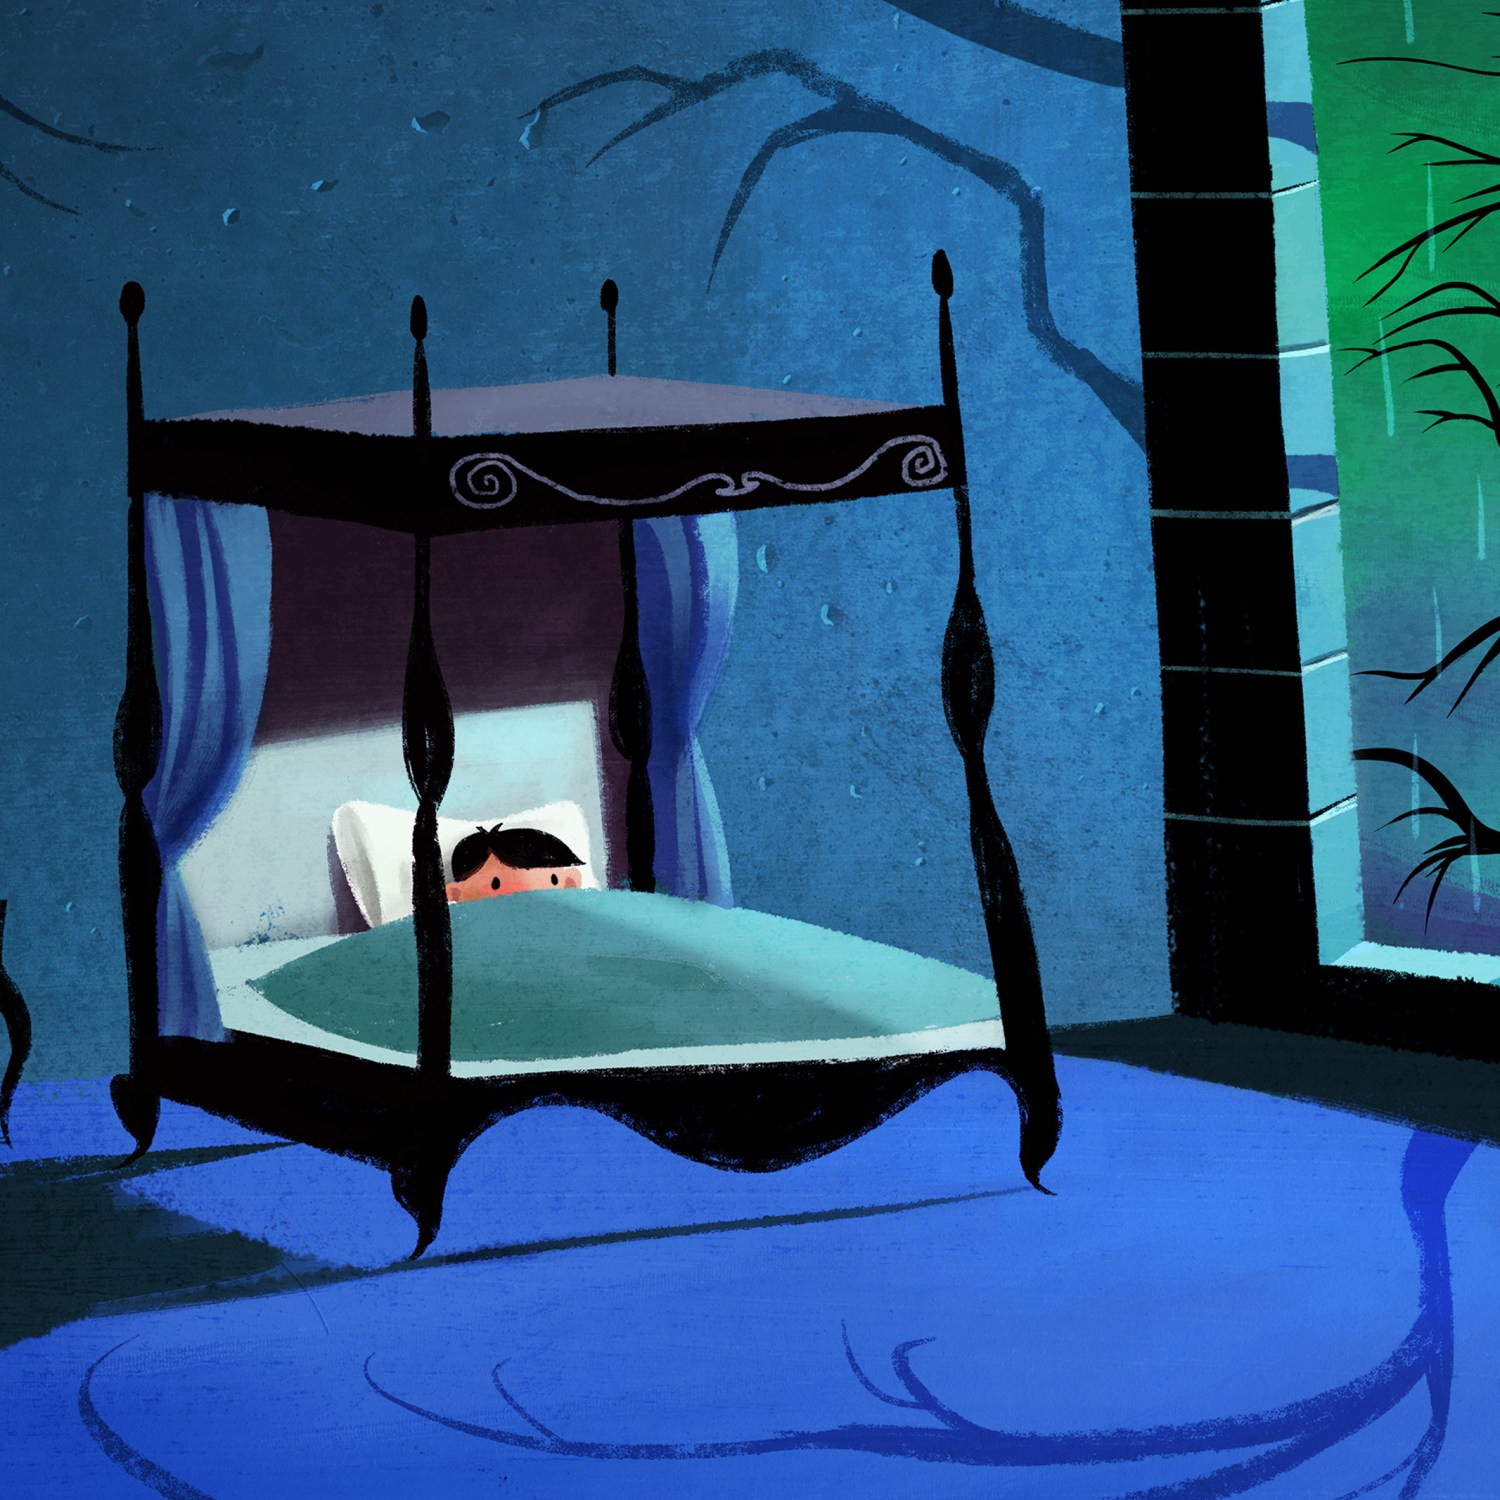 Illustration of a child tucked in bed in spooky surroundings